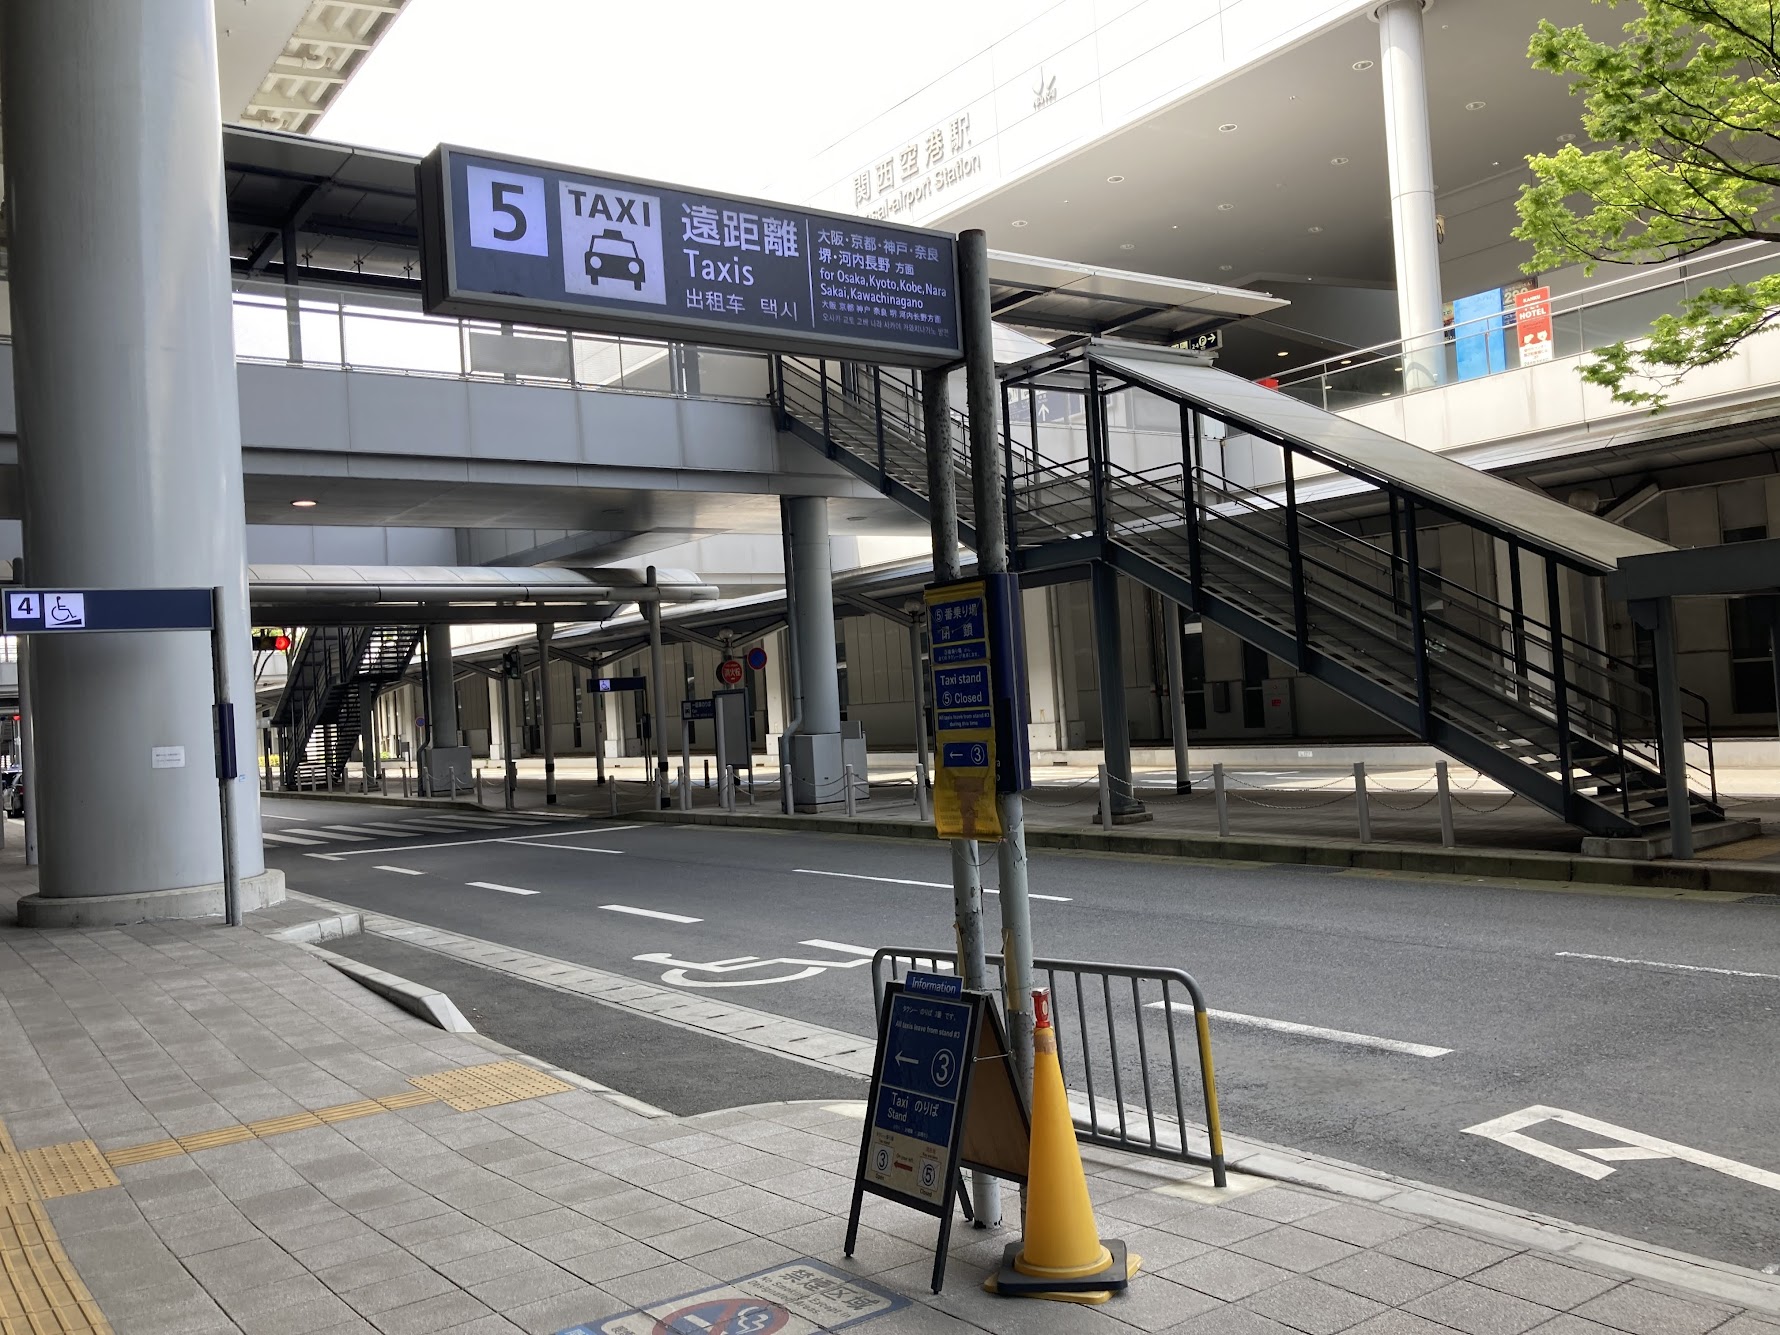 Access from Kansai airport to Osaka by taxi